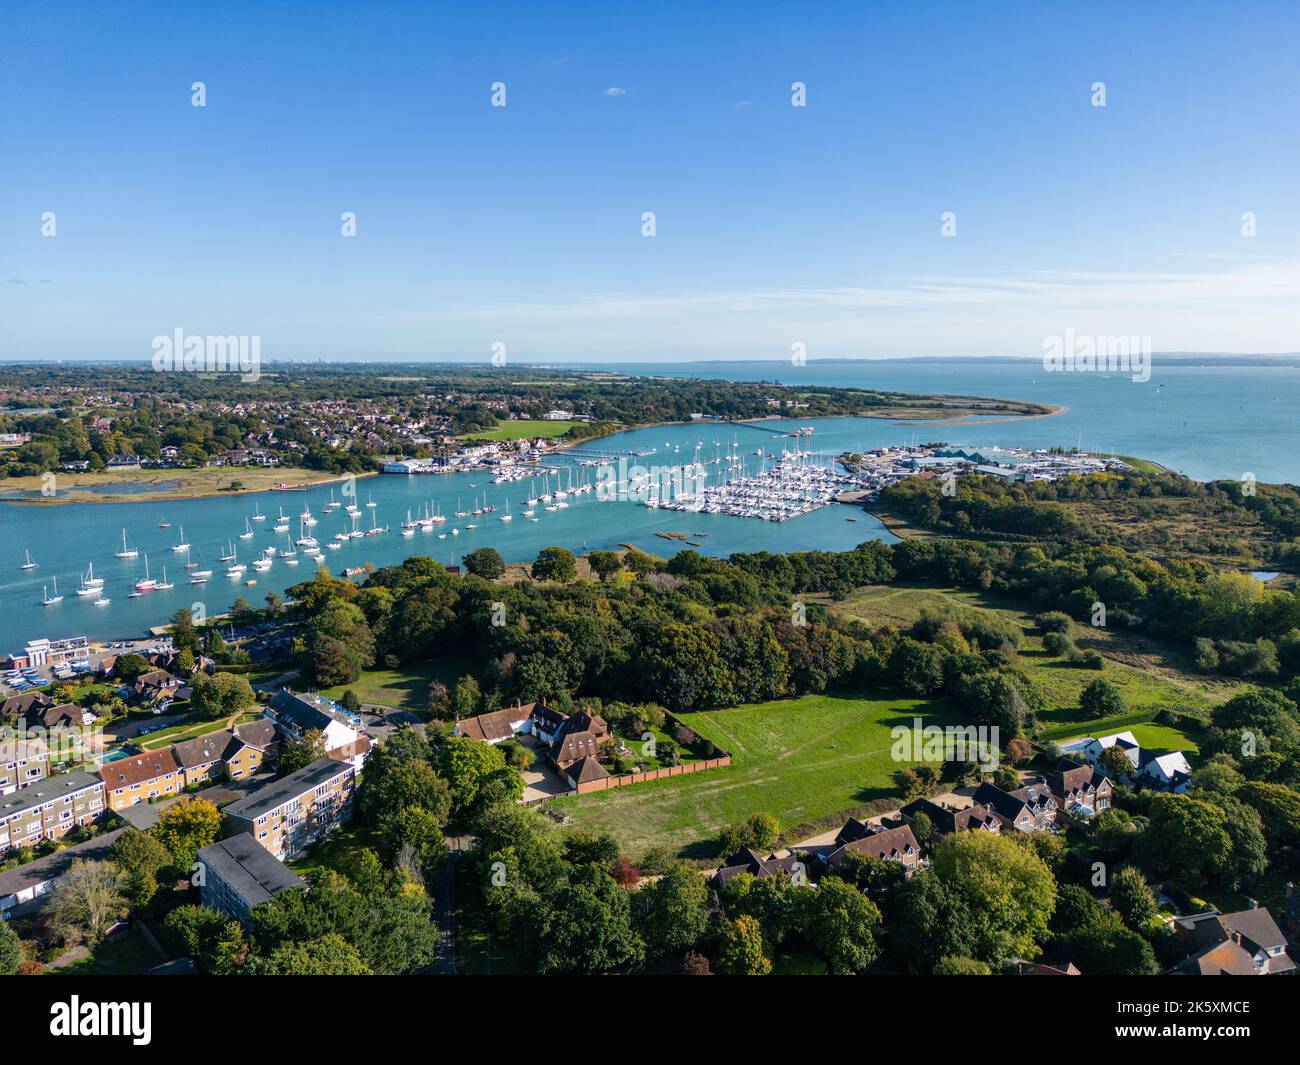 Aerial View Over Hamble, and the River Hamble in Hampshire, England on a beautiful calm and sunny October day Stock Photo